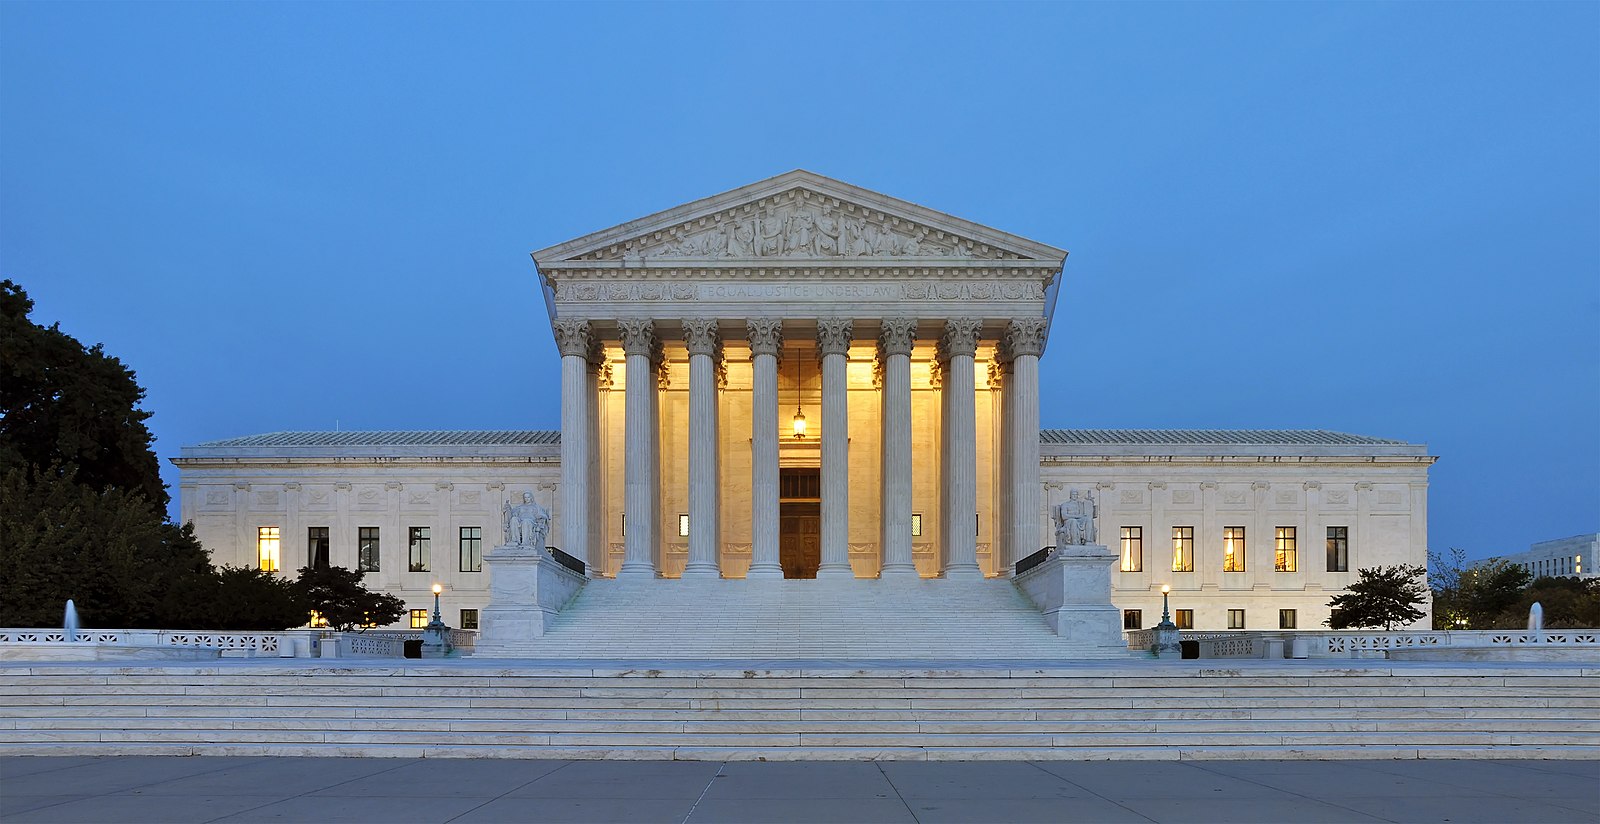 Title: Panorama of United States Supreme Court Building at Dusk Author: Joe Ravi License conditions: credit author Source: https://commons.wikimedia.org/w/index.php?curid=16959908